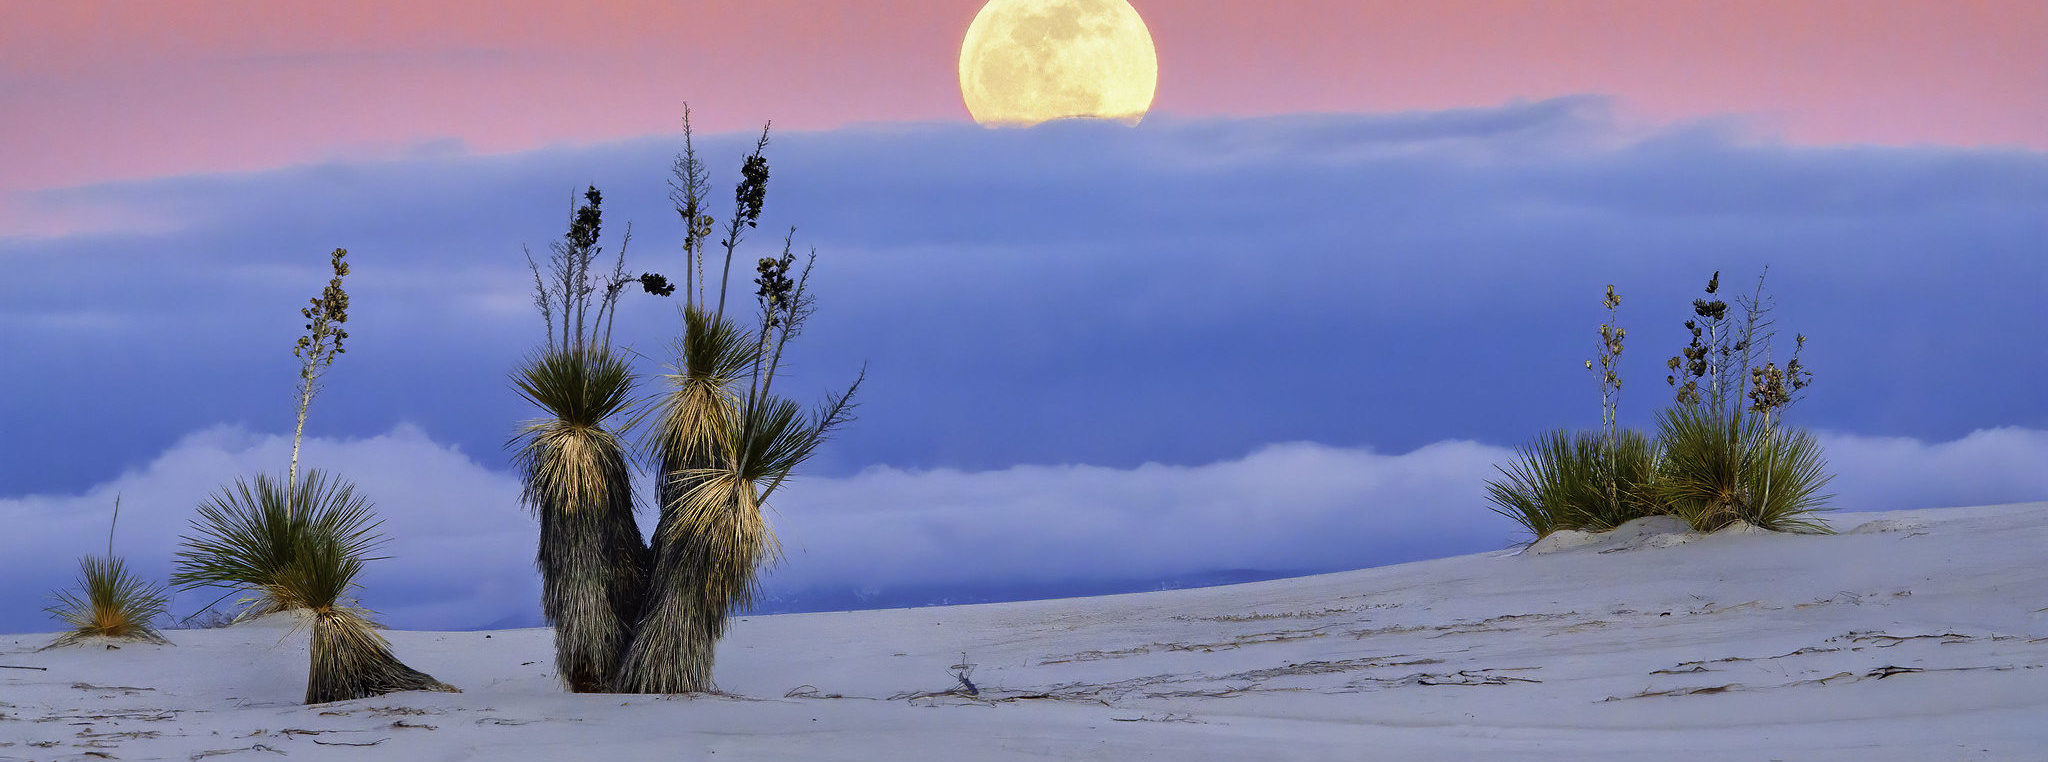 White Sands Moon rise, White Sands National Monument, New Mexico. Photo credit: New Mexico via Flickr.